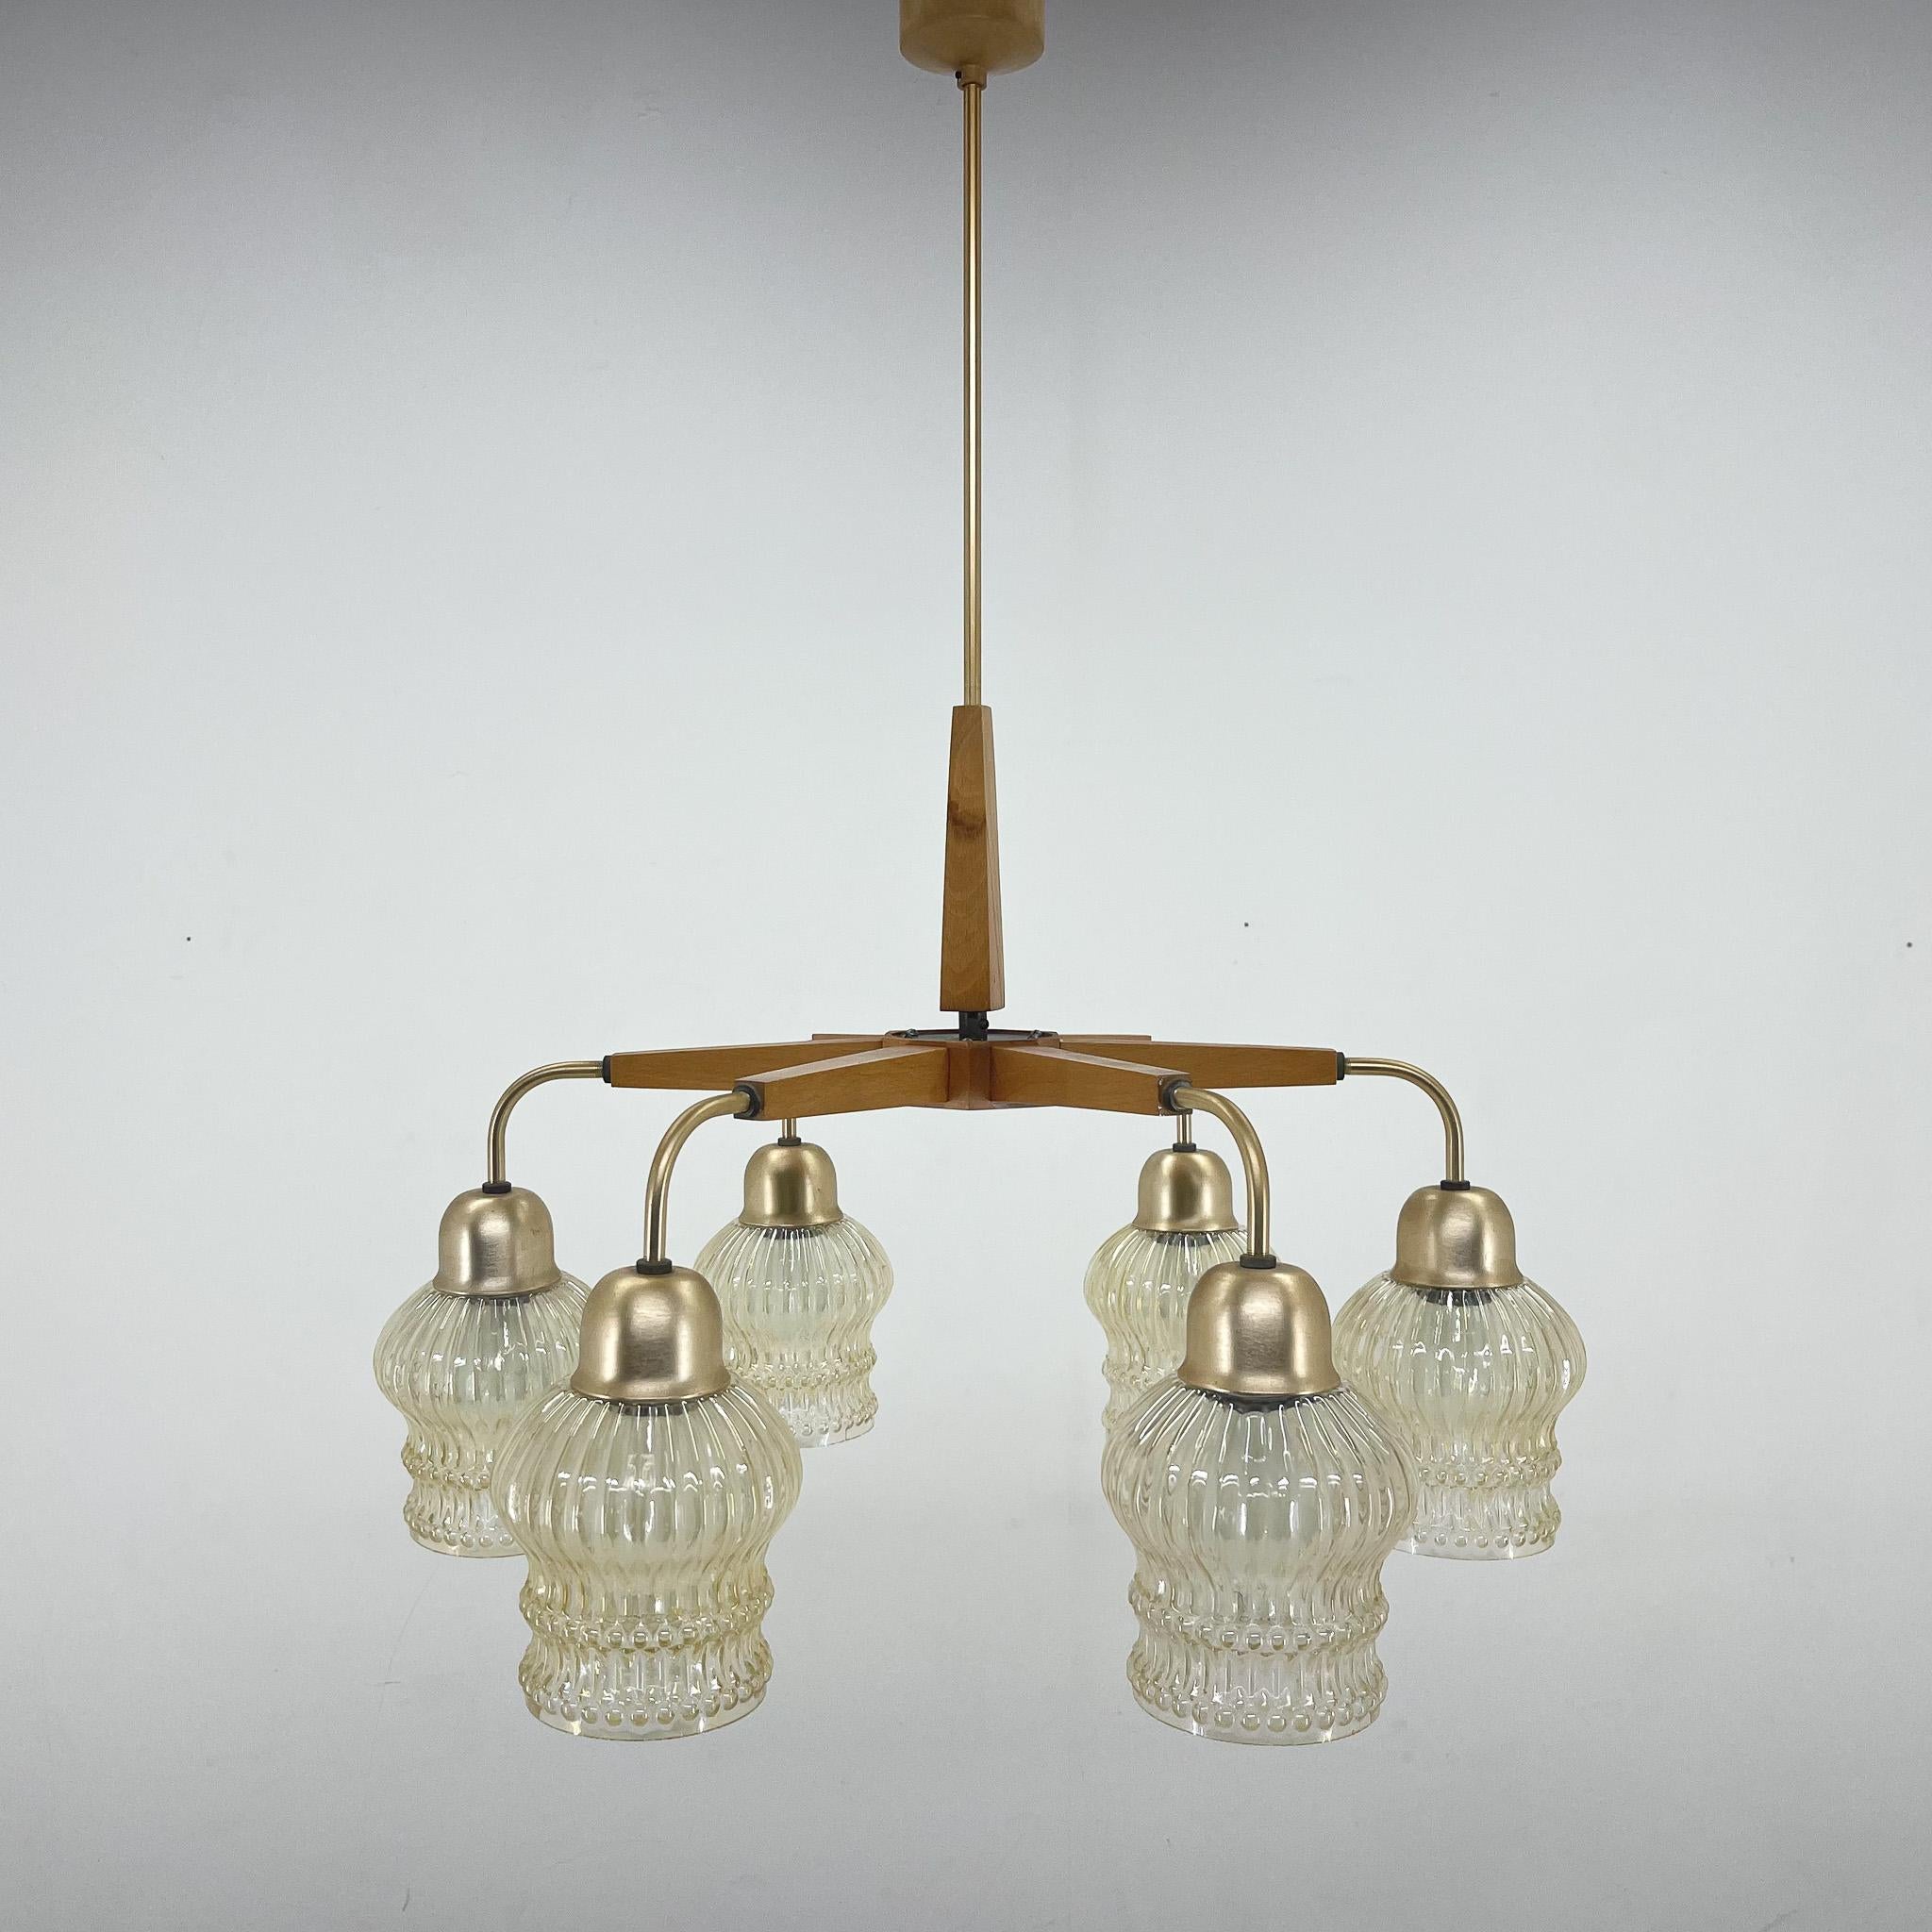 Vintage wooden, six armed chandelir. Made in former Czechoslovakia in the 1970's. Bulb: 6 x E25-E27.